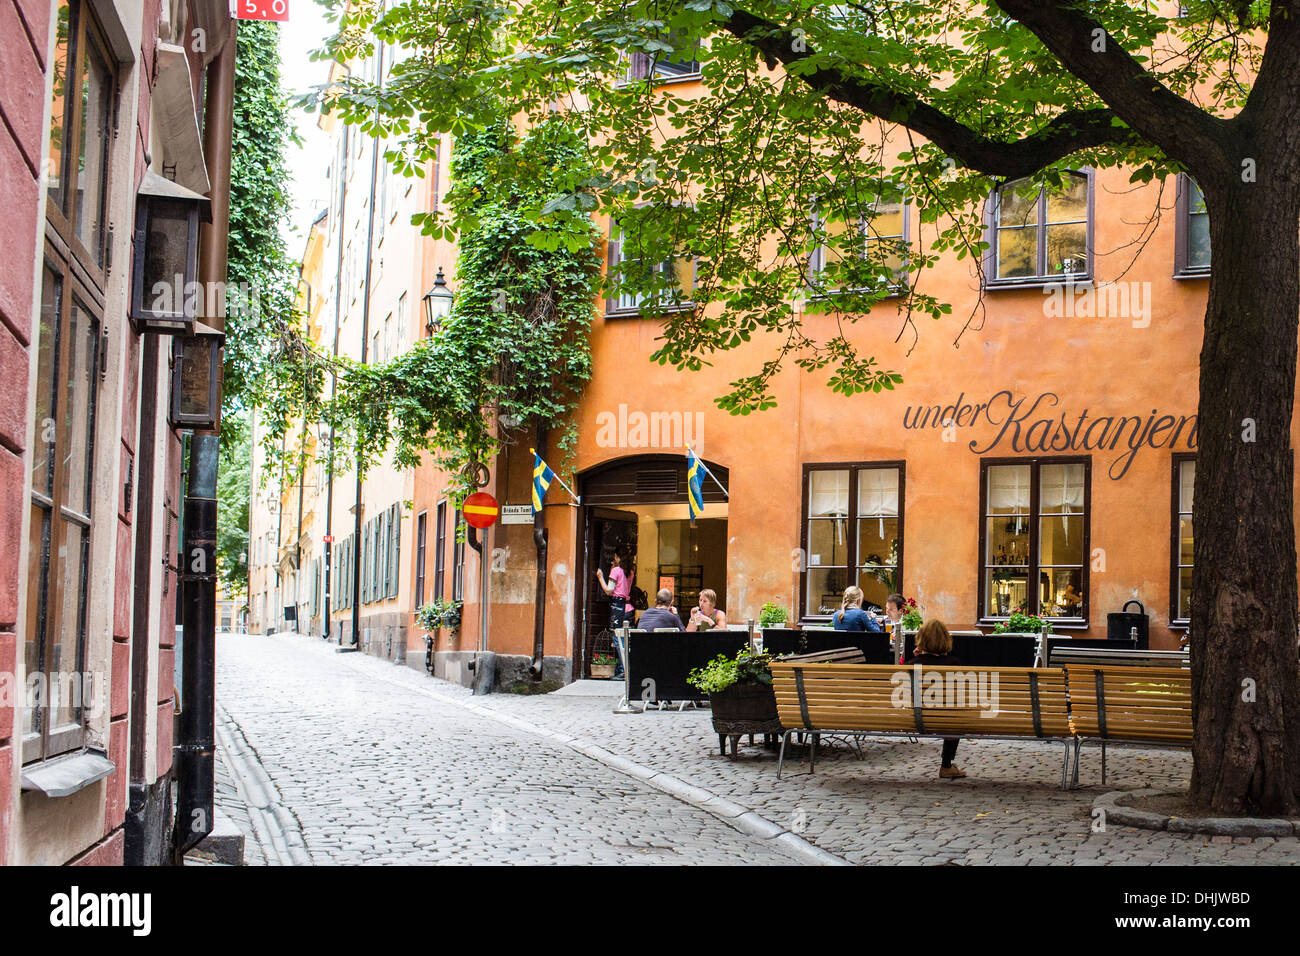 A street cafe at Gamla stan, Stockholm, Sweden, Europe Stock Photo